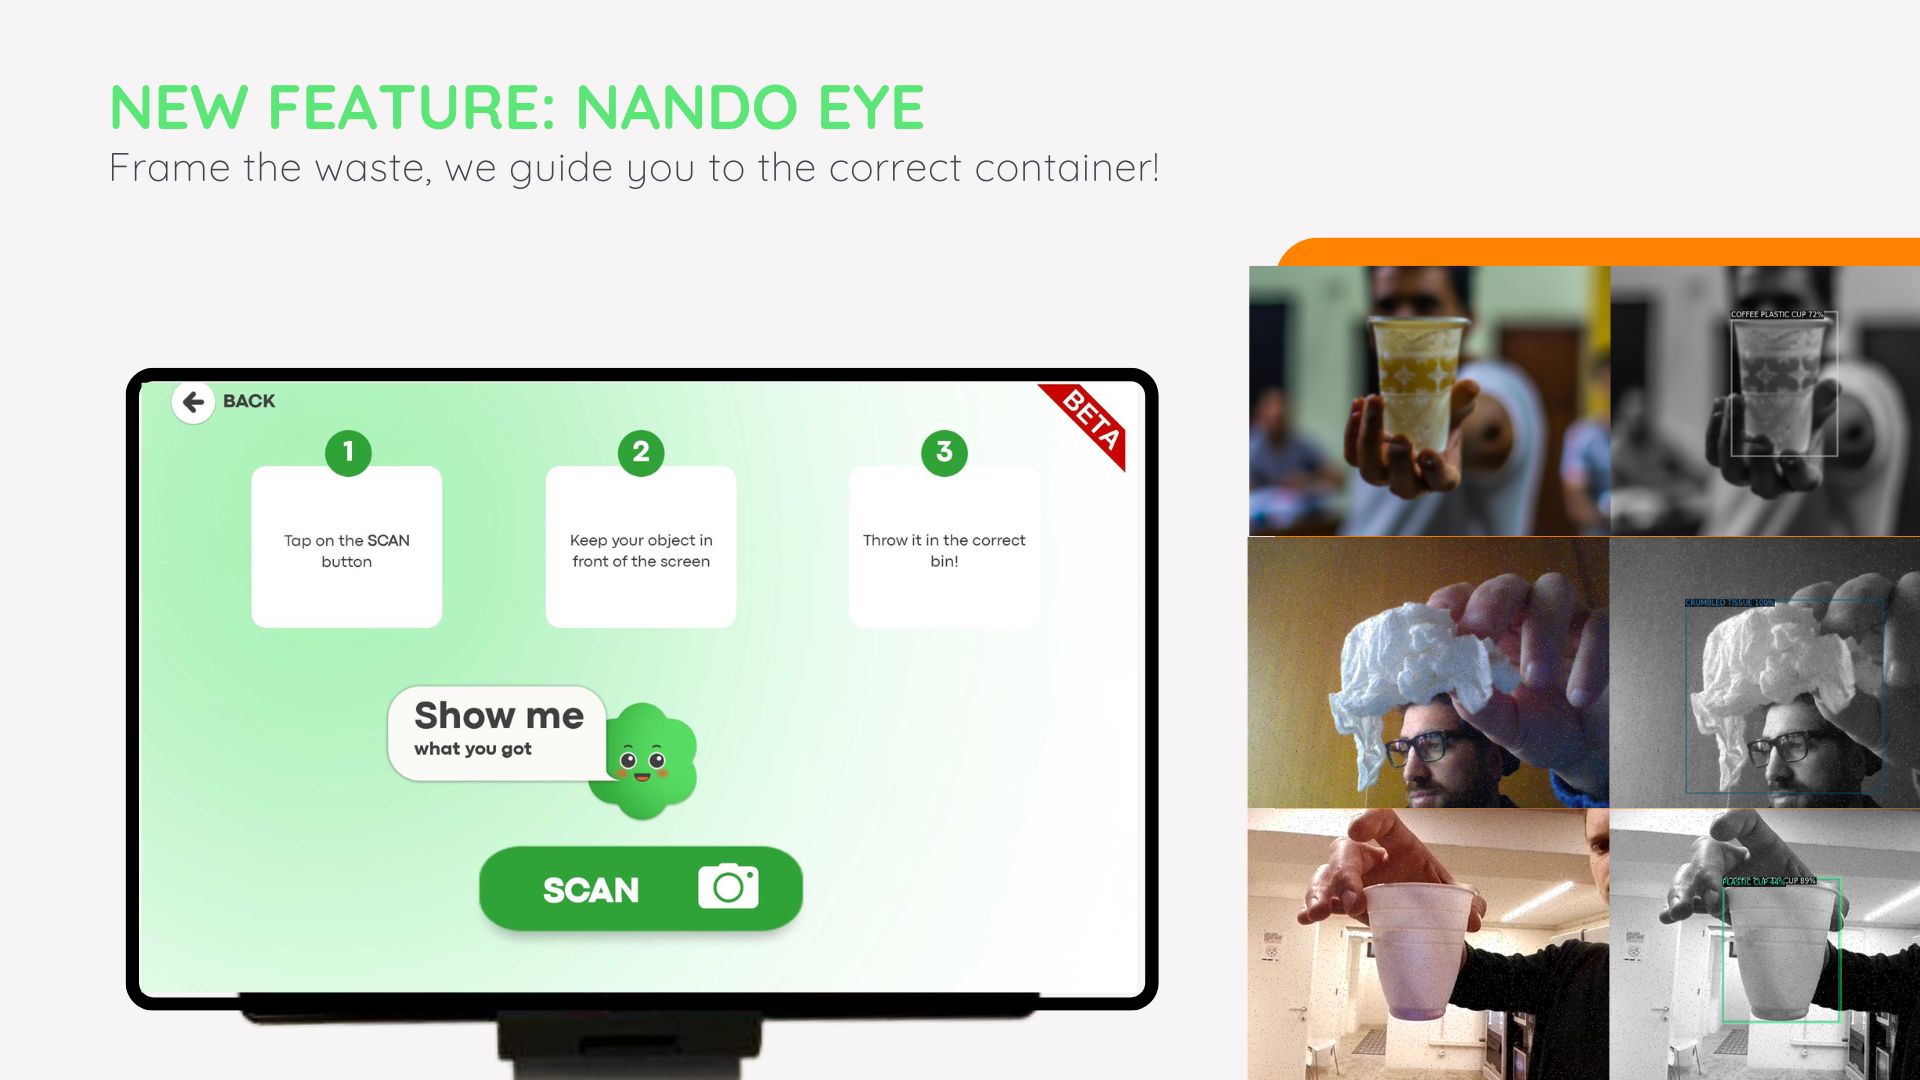 New feature released: NANDO EYE!